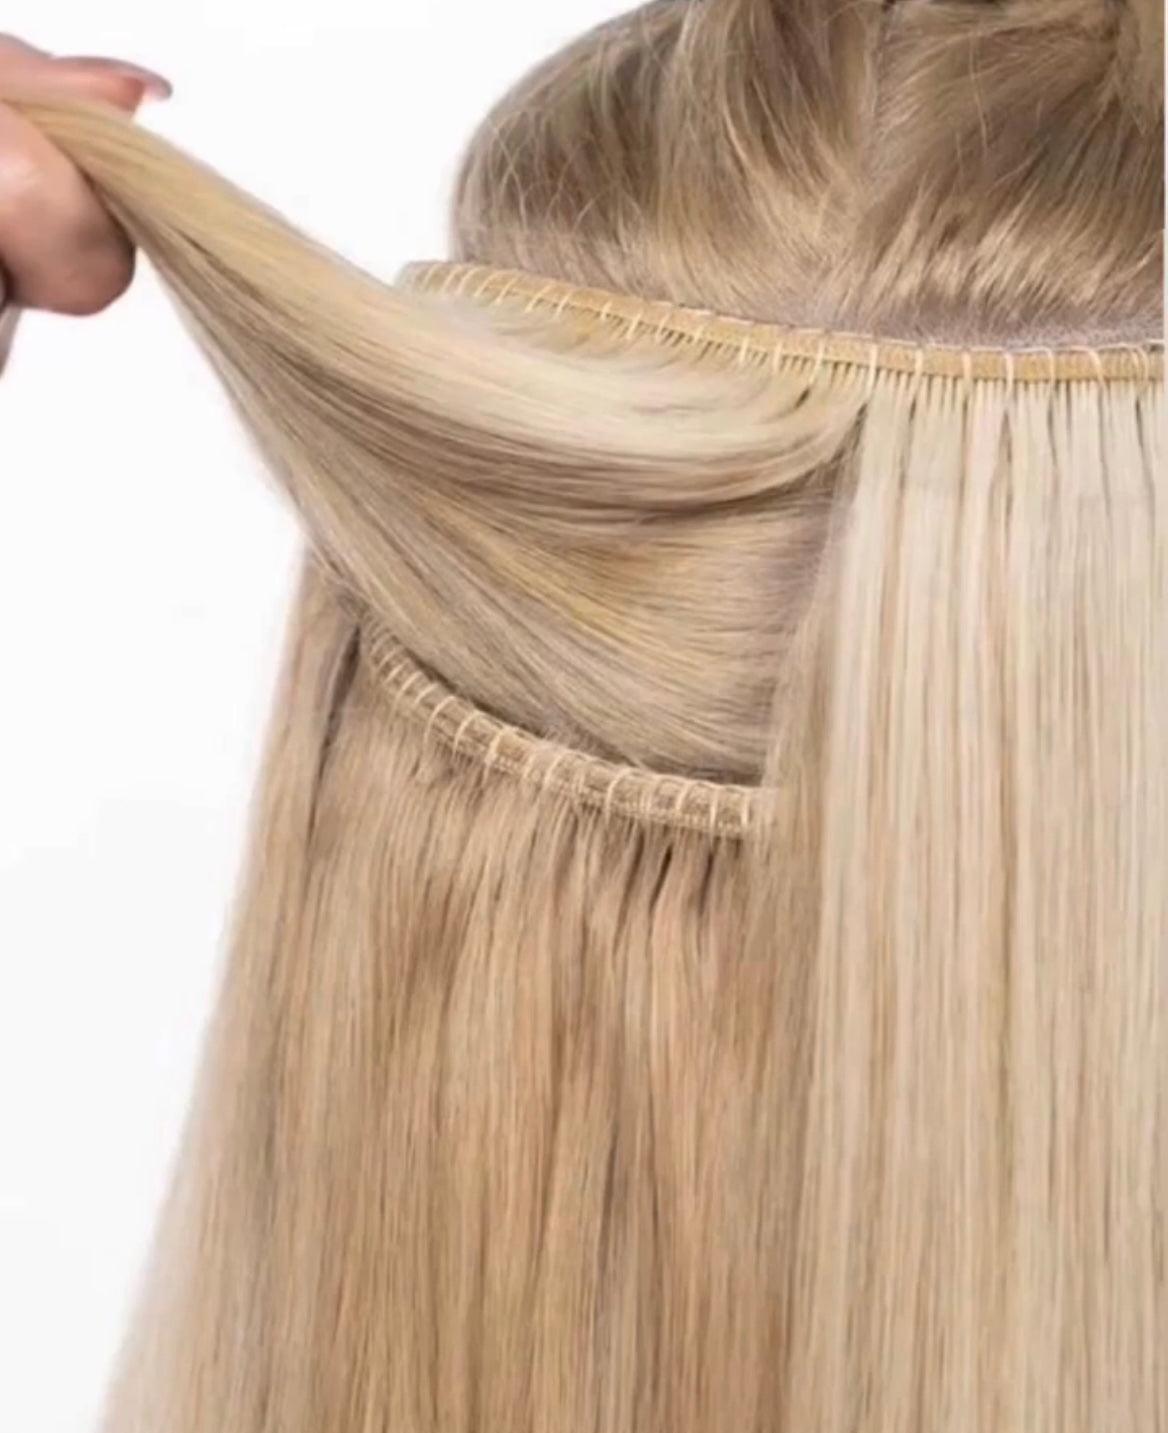 Handtied hair extension 1 day in person course - Premium courses from Millionaire Beauty Brand Extensions - Just $3900.00! Shop now at Millionaire Beauty Brand Extensions 